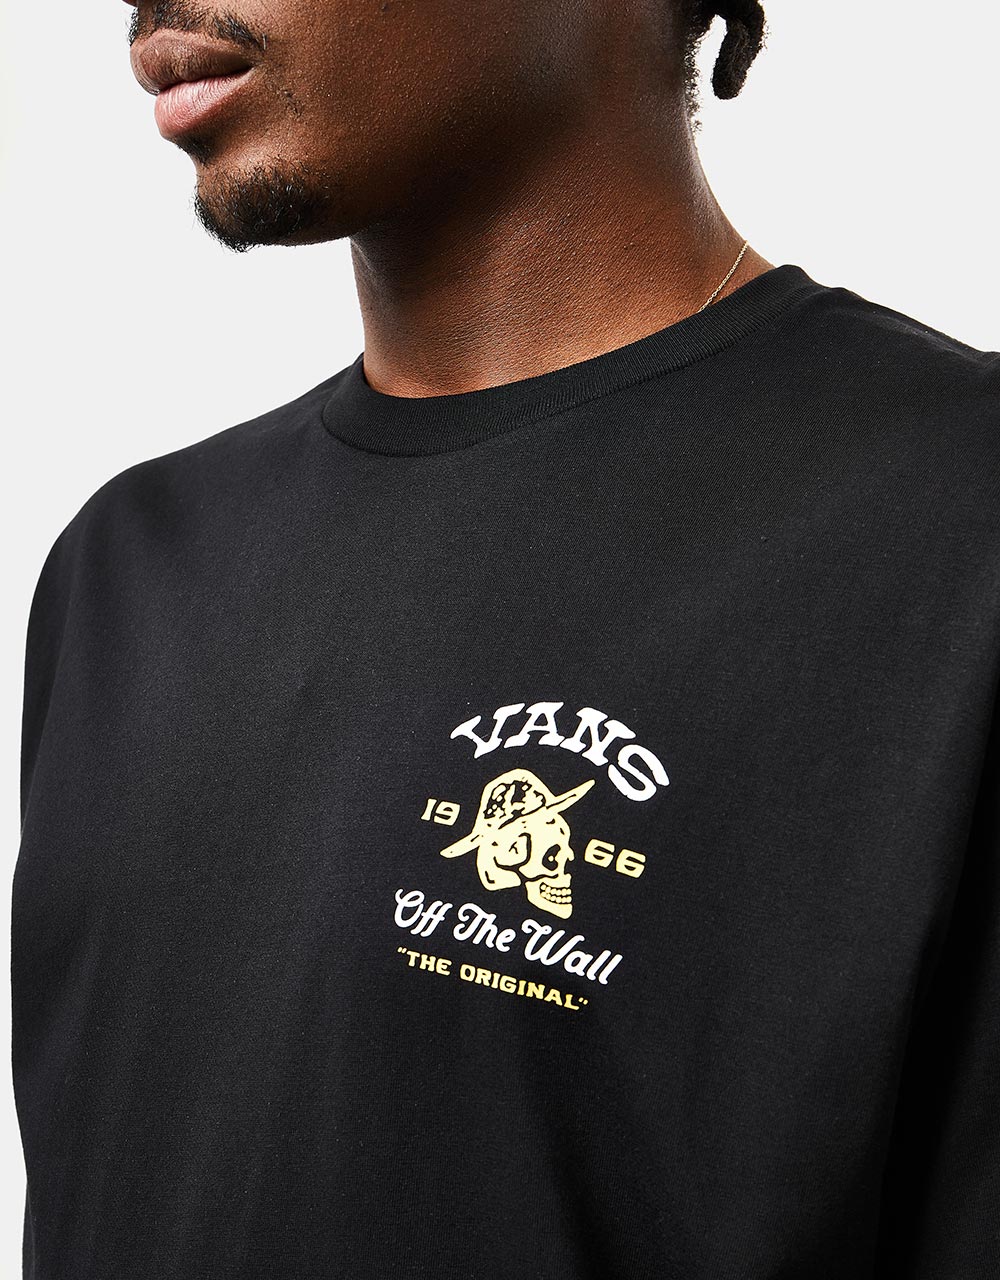 Vans Middle Of Nowhere T-Shirt - Black